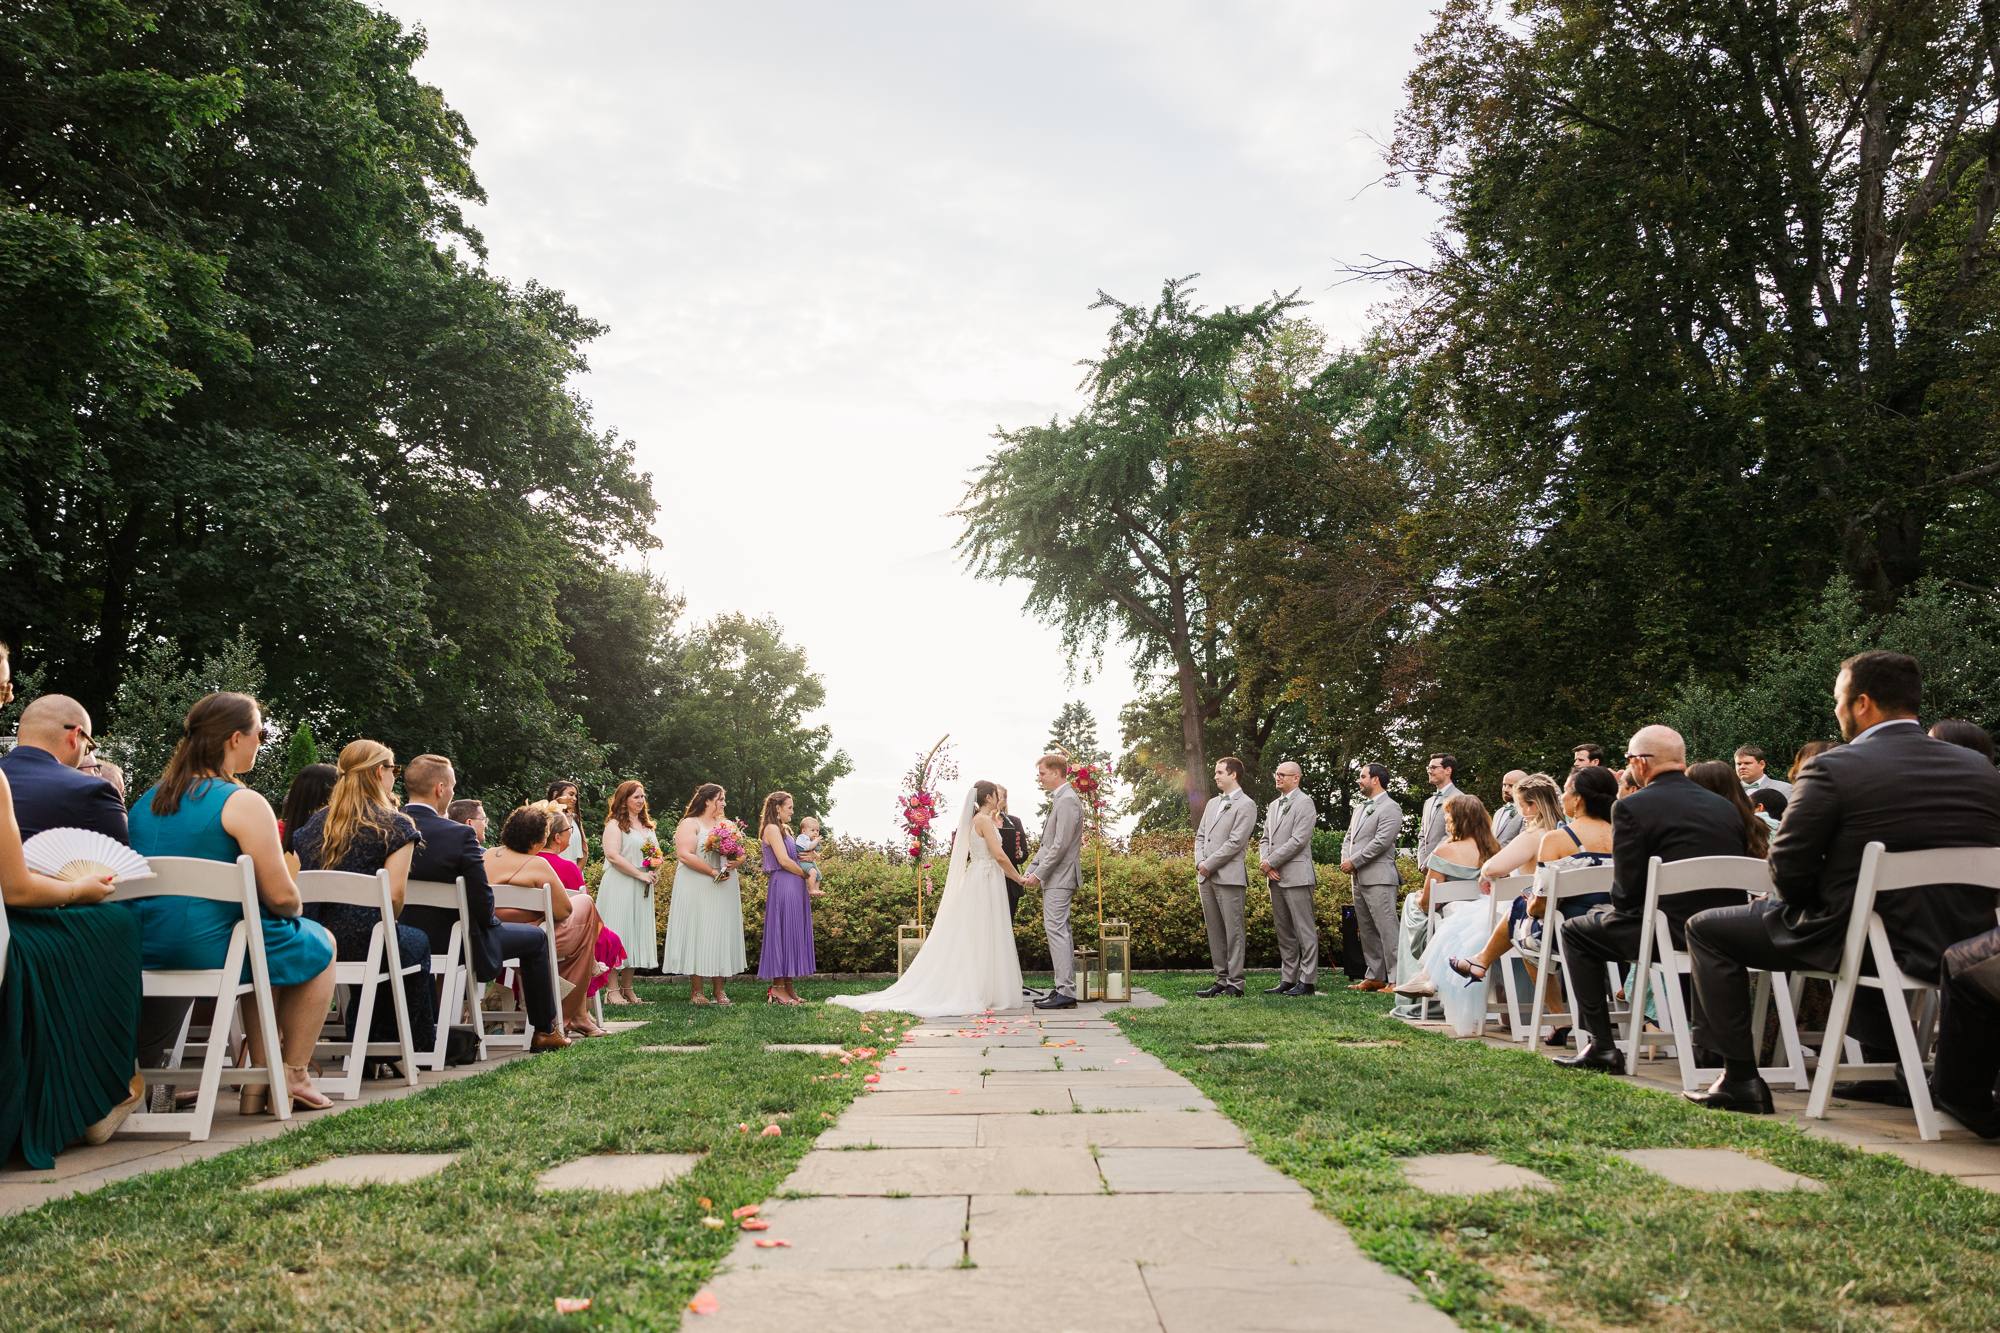 Radiant Wedding at Briarcliff Manor in Summertime